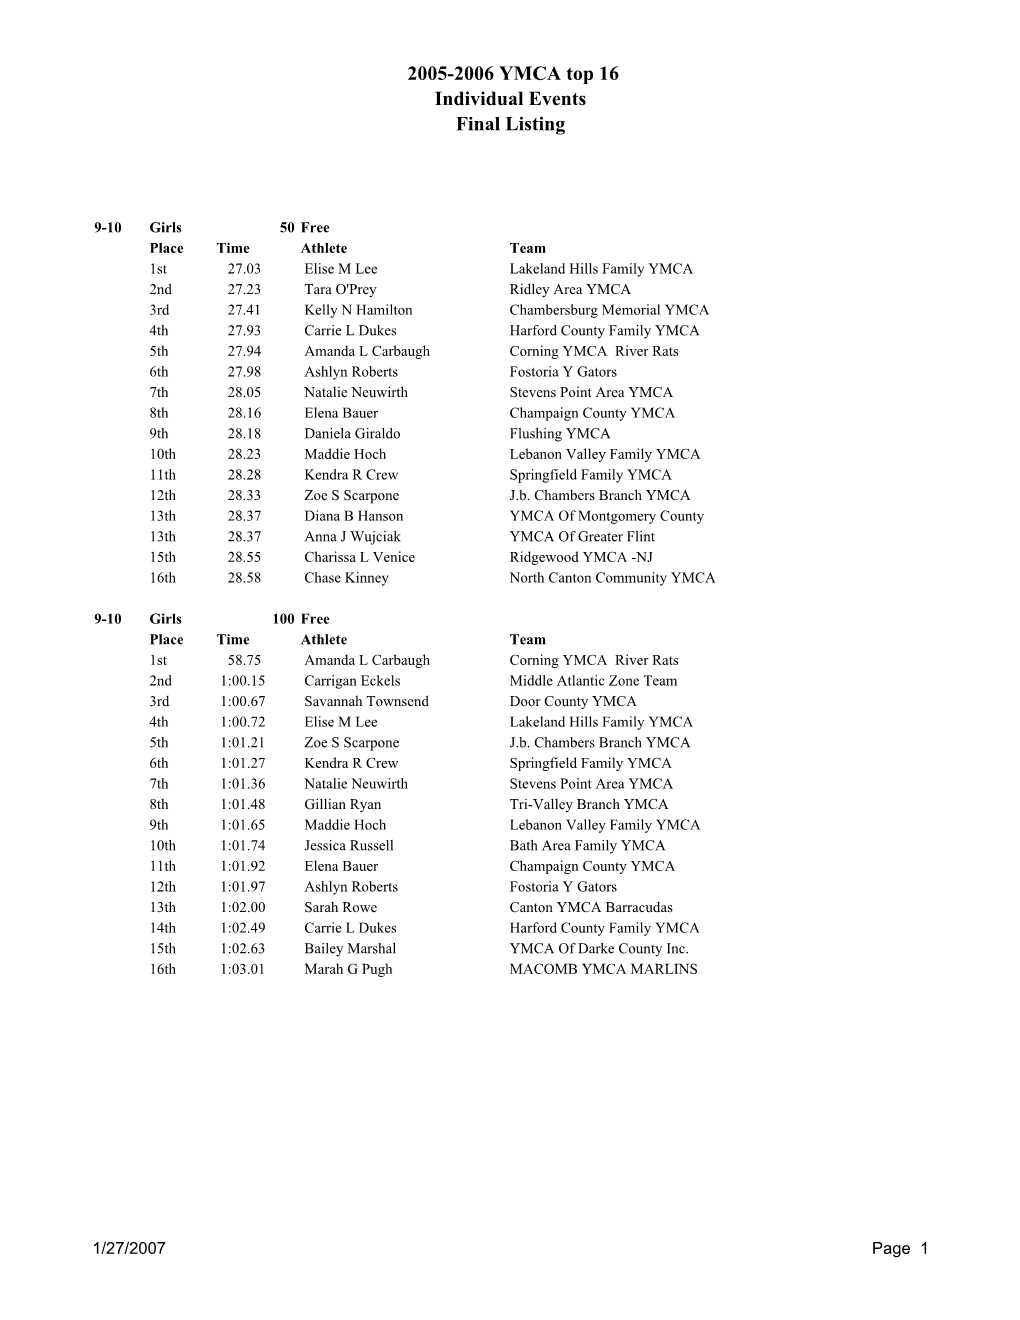 2005-2006 YMCA Top 16 Individual Events Final Listing